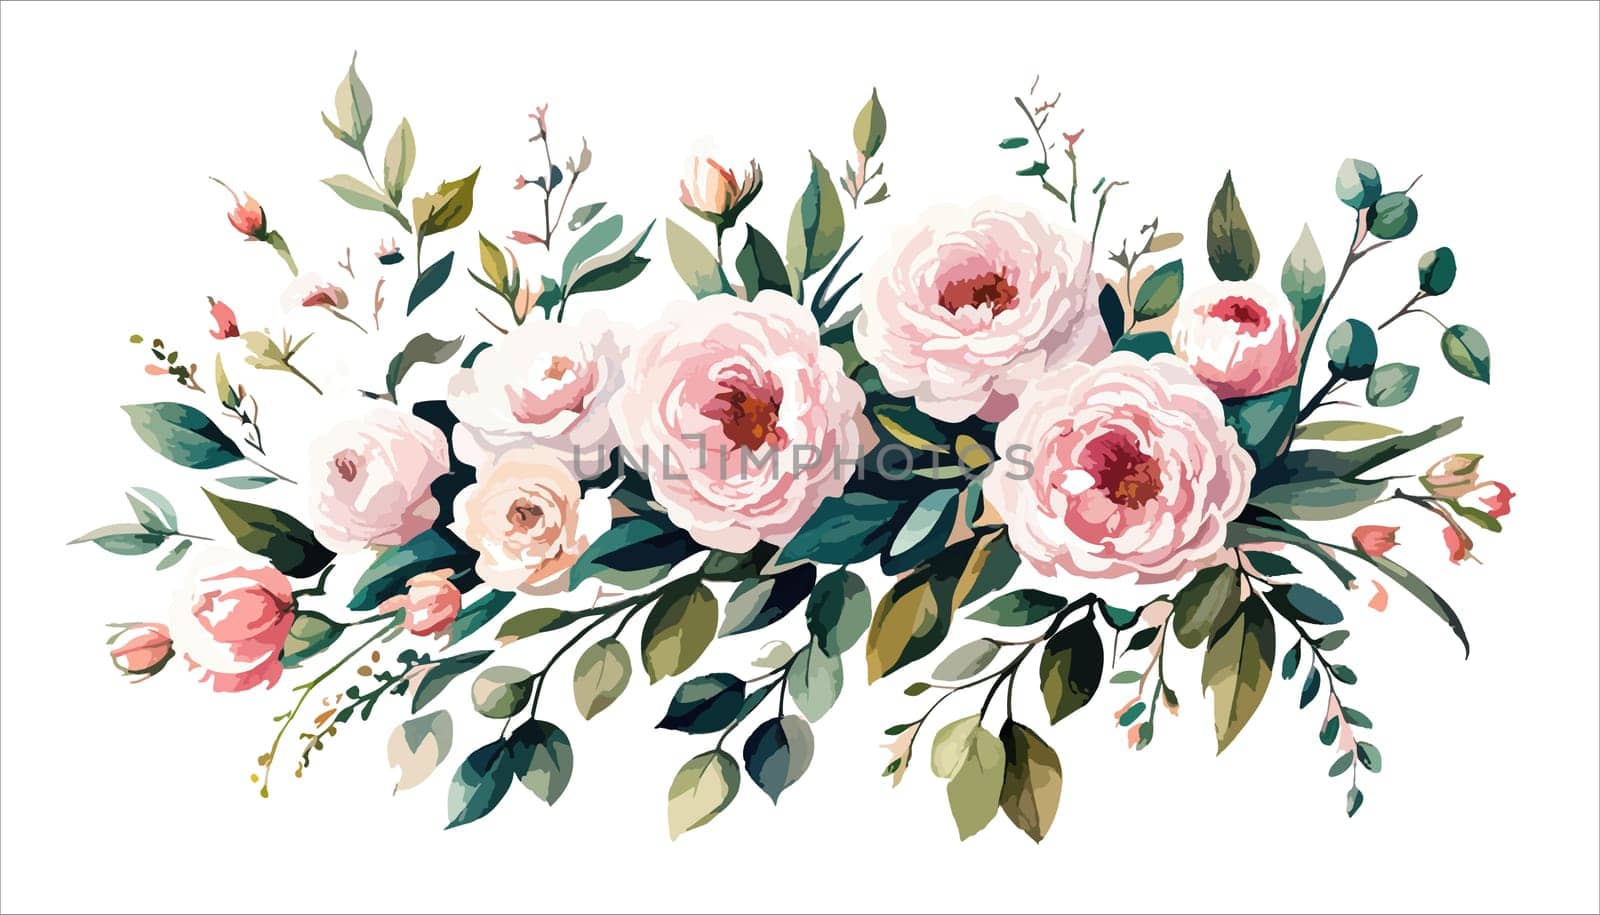 Watercolor illustration of bouquet with pink roses and buds, green leaves on a white background, illustration for postcard and congratulations design